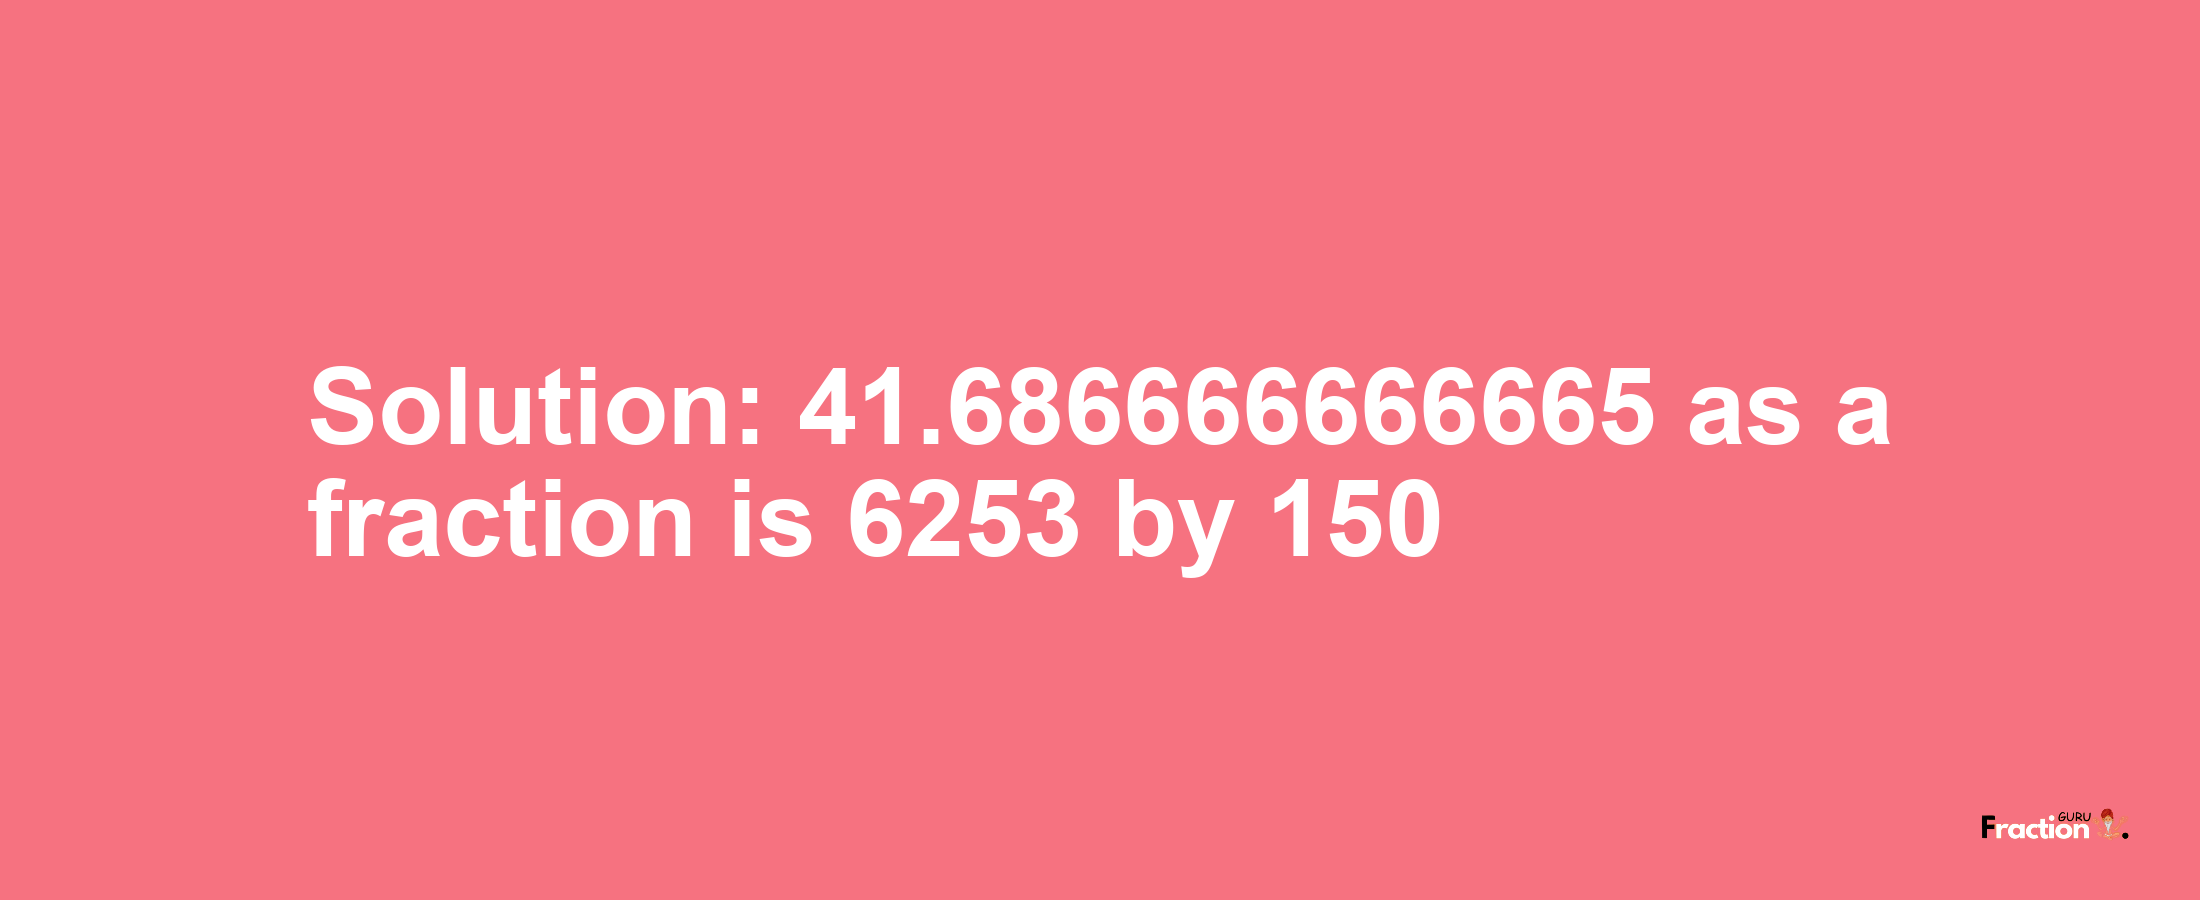 Solution:41.686666666665 as a fraction is 6253/150